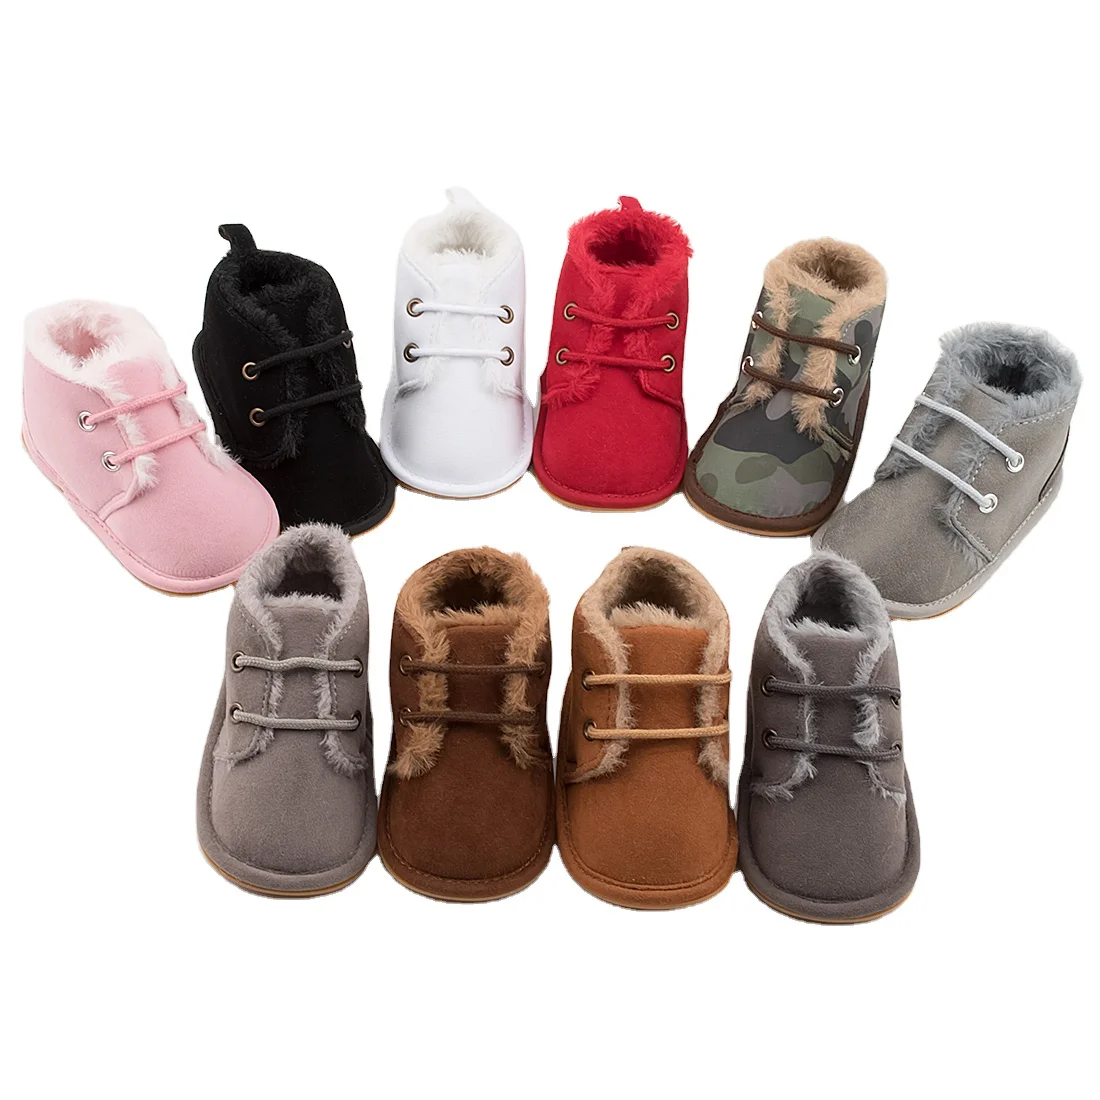 

Hot Sell Outdoor Infant Baby Boots Casual Shoes Warm Winter Faux Deerskin Upper Anti-Slip Soft Rubber Sole